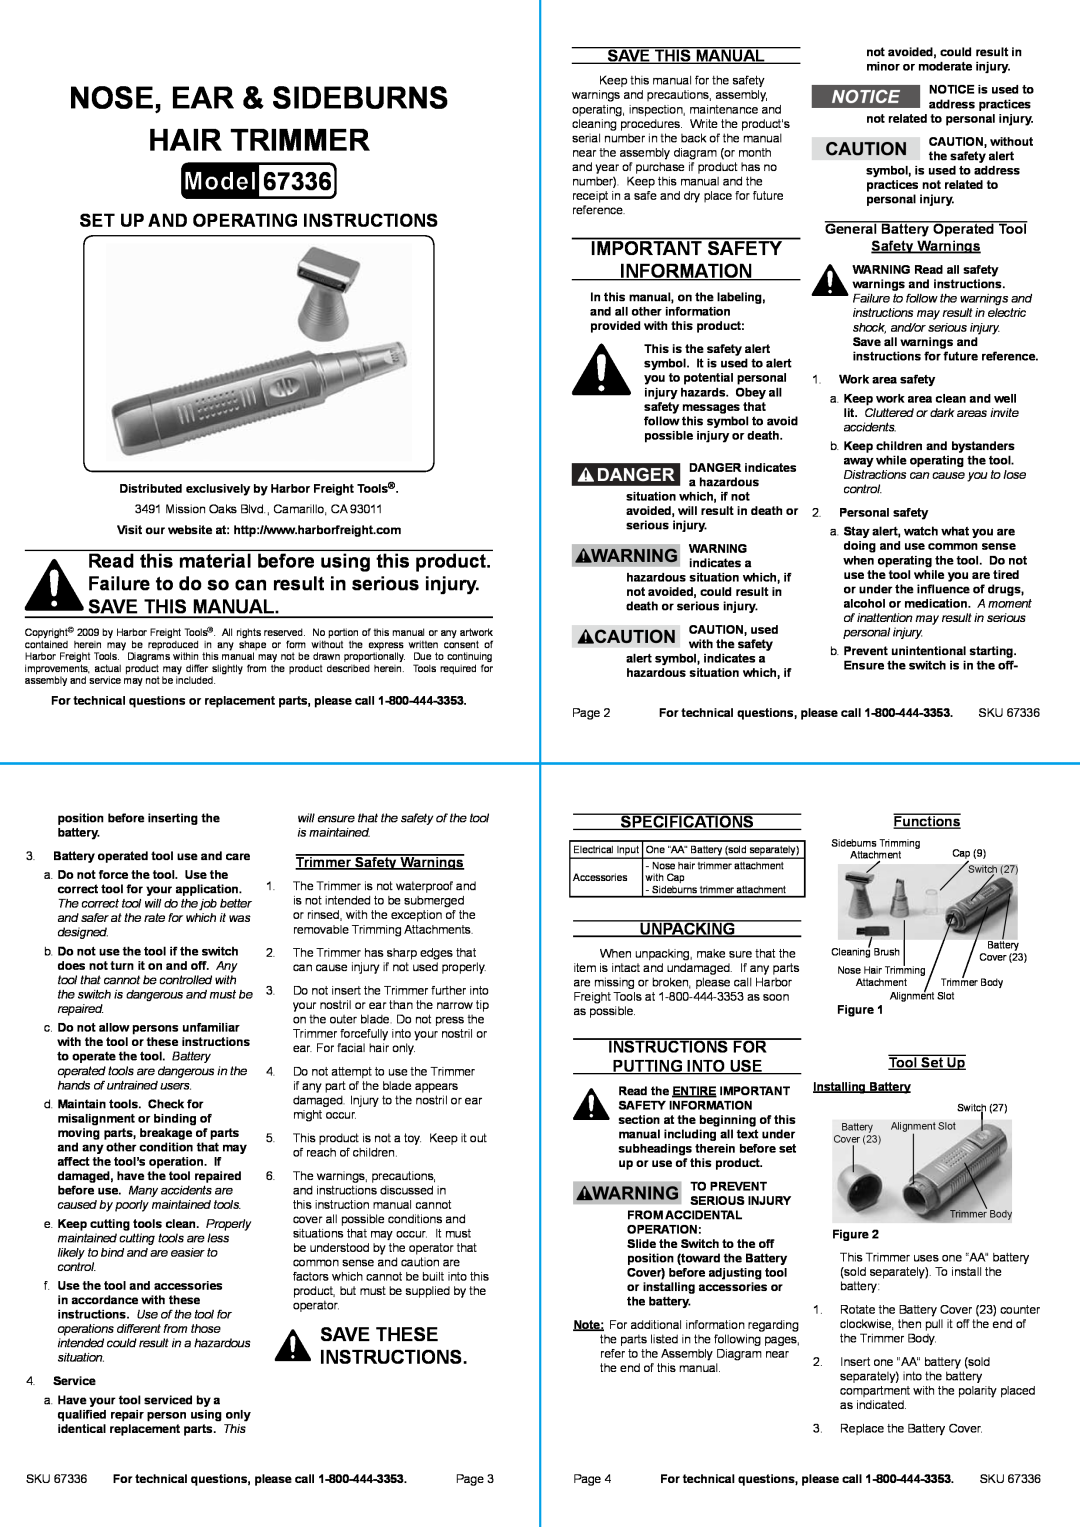 Harbor Freight Tools 67336 specifications saVe this manual, General Battery operated tool, safety Warnings, hair trimmer 